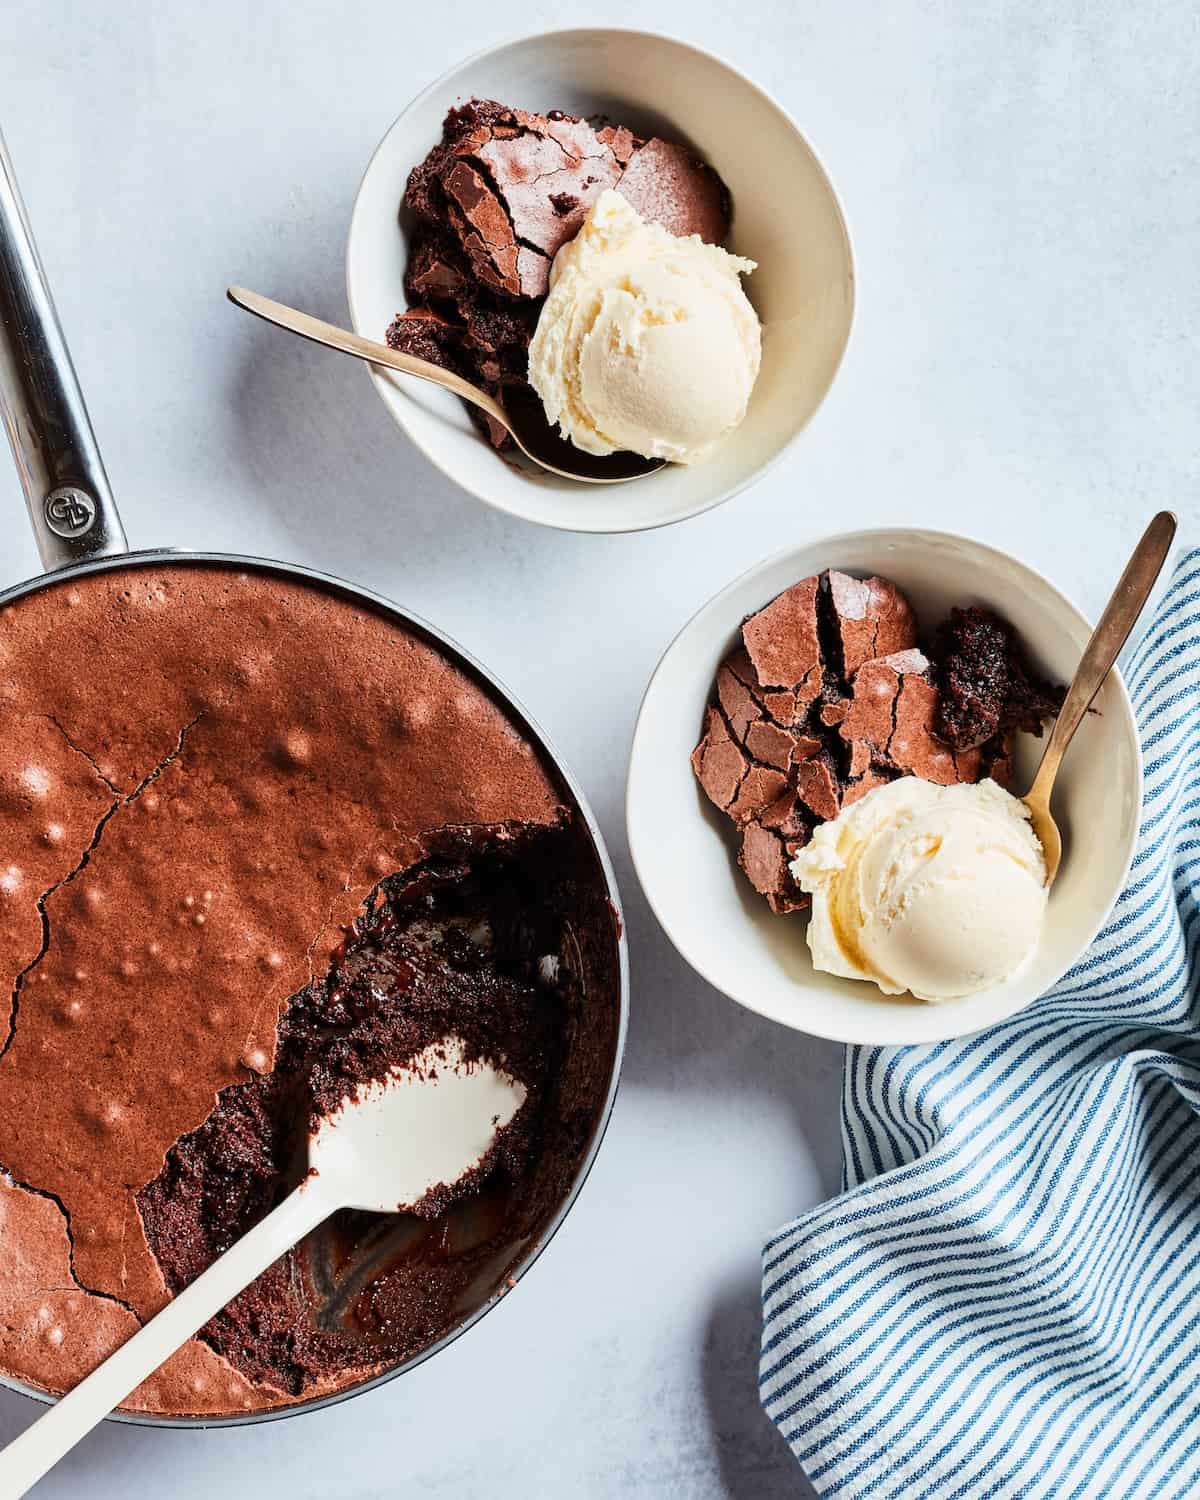 A skillet with chocolate brownie pudding served into two white bowls, with a scoop of vanilla ice cream and a striped kitchen towel placed on the side.